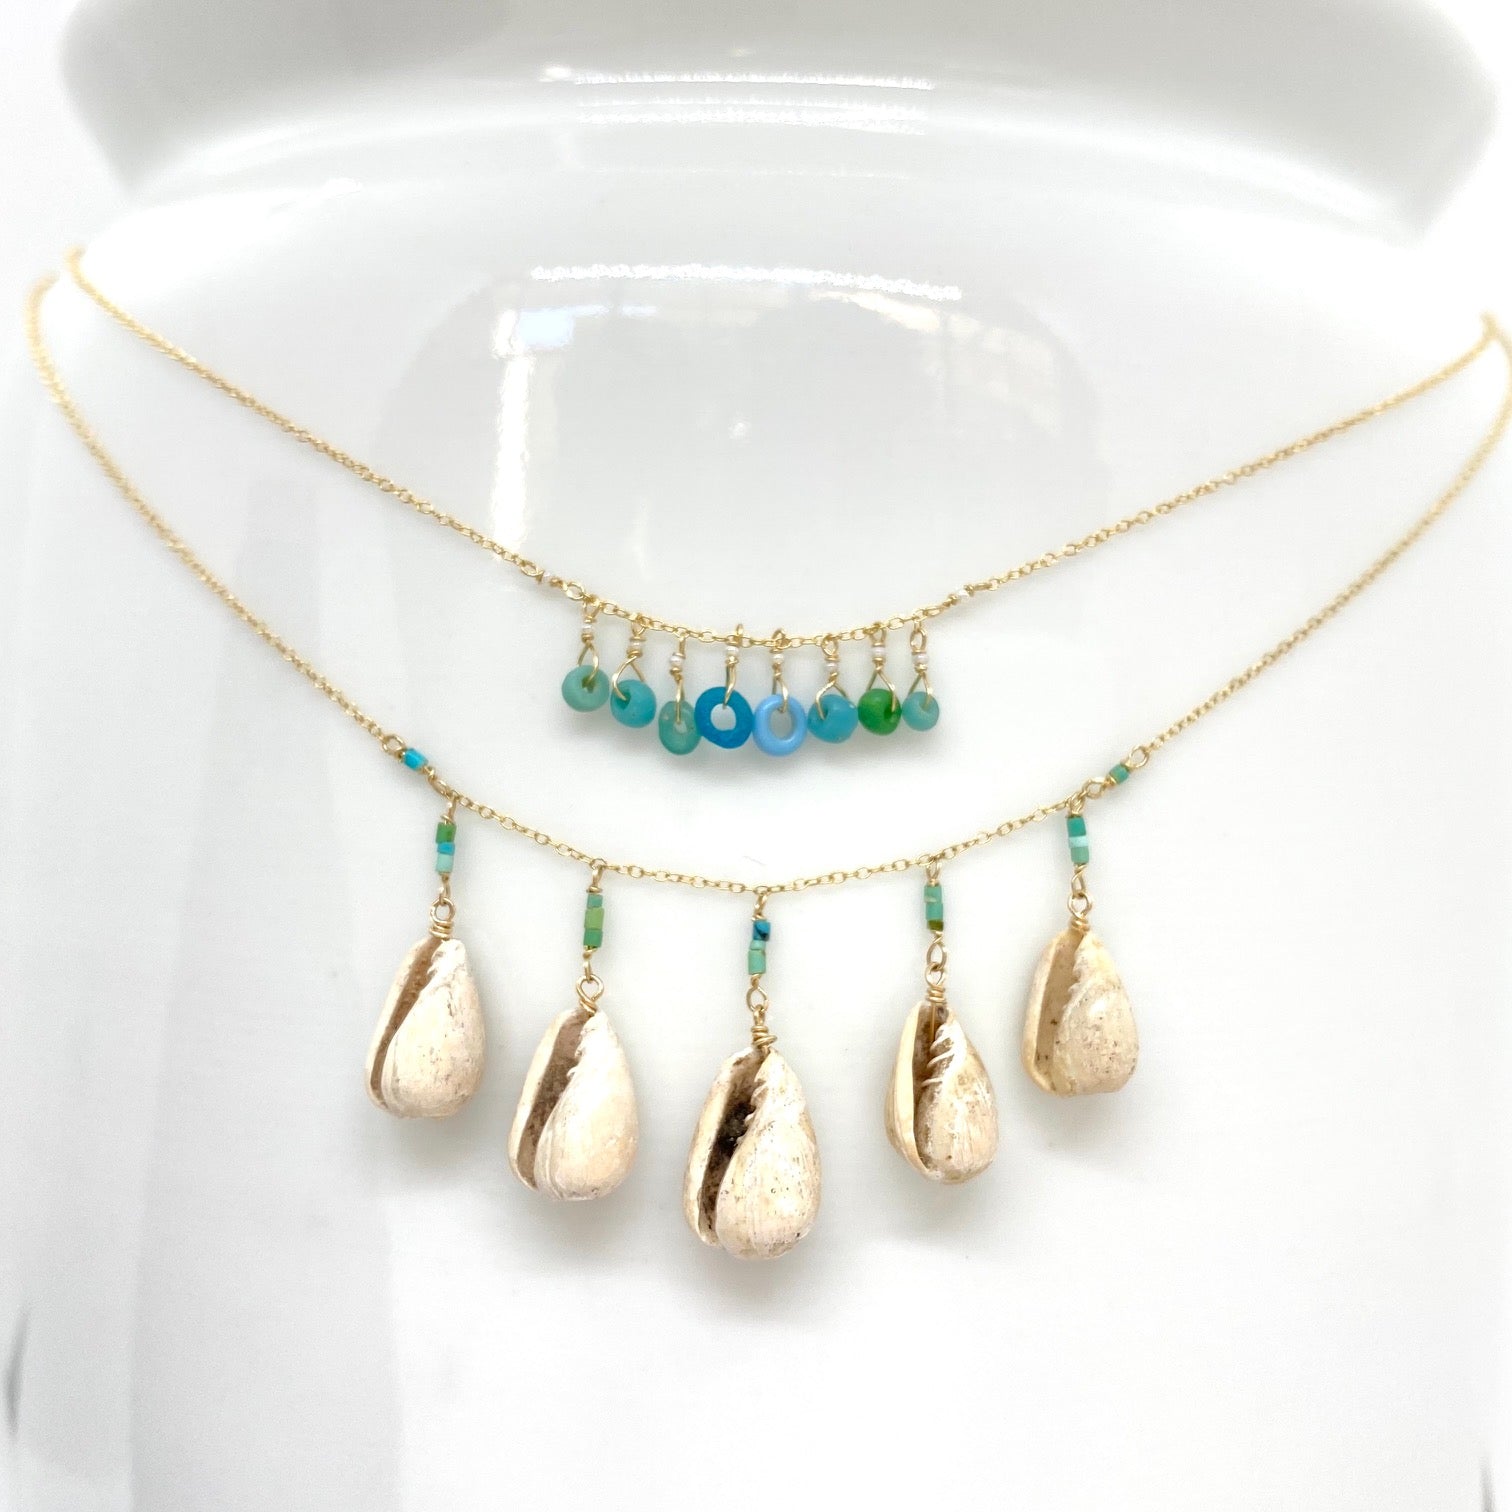 14k Gold Chain Necklace w/ Pre-Columbian Shells & Afghan Turquoise